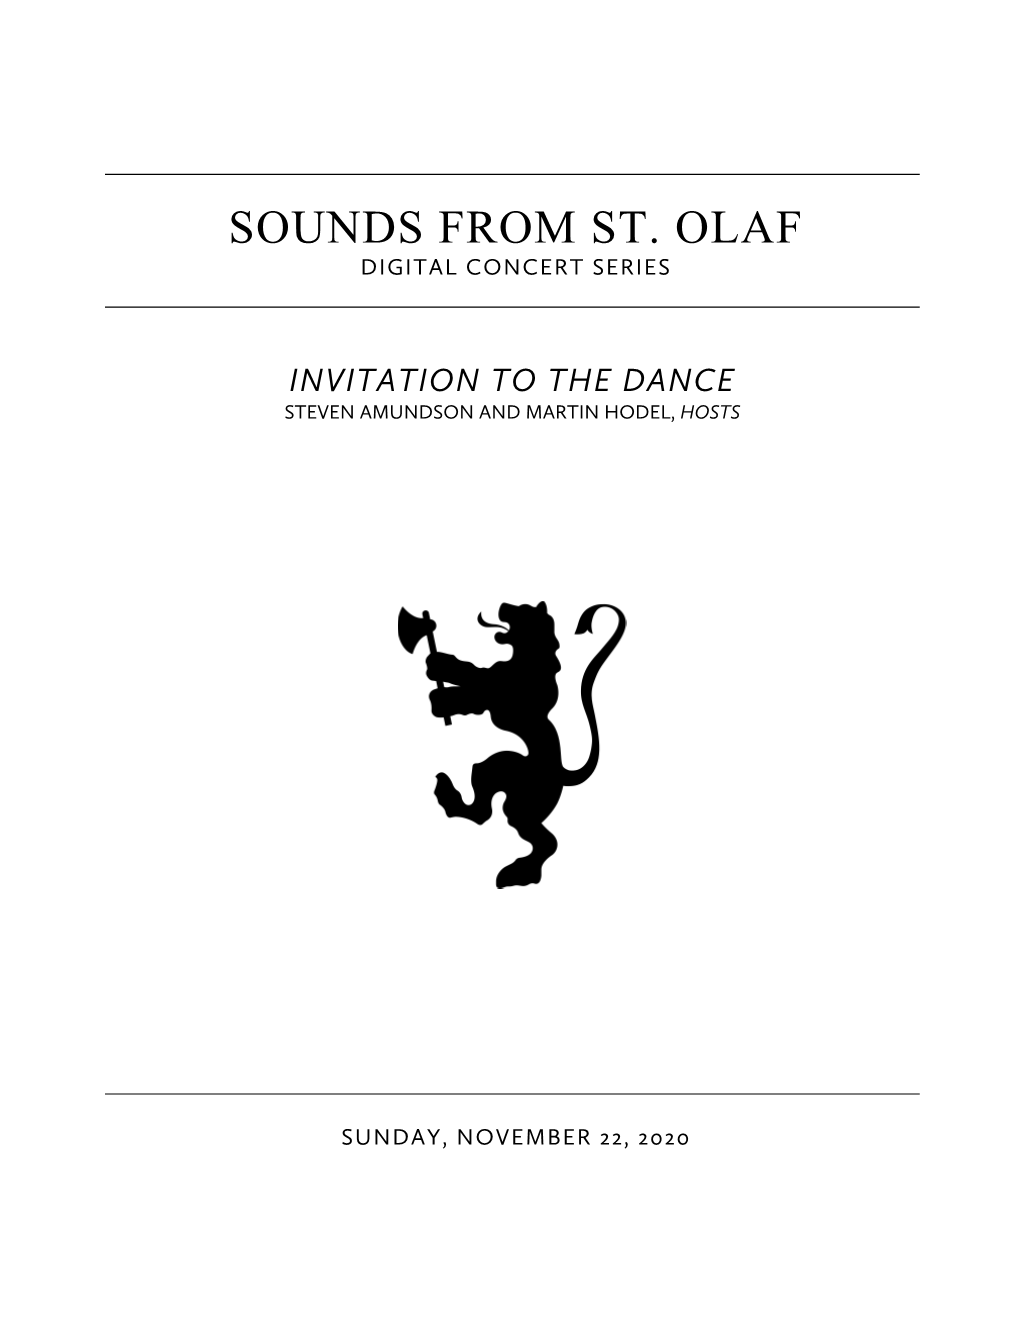 Sounds from St. Olaf Digital Concert Series